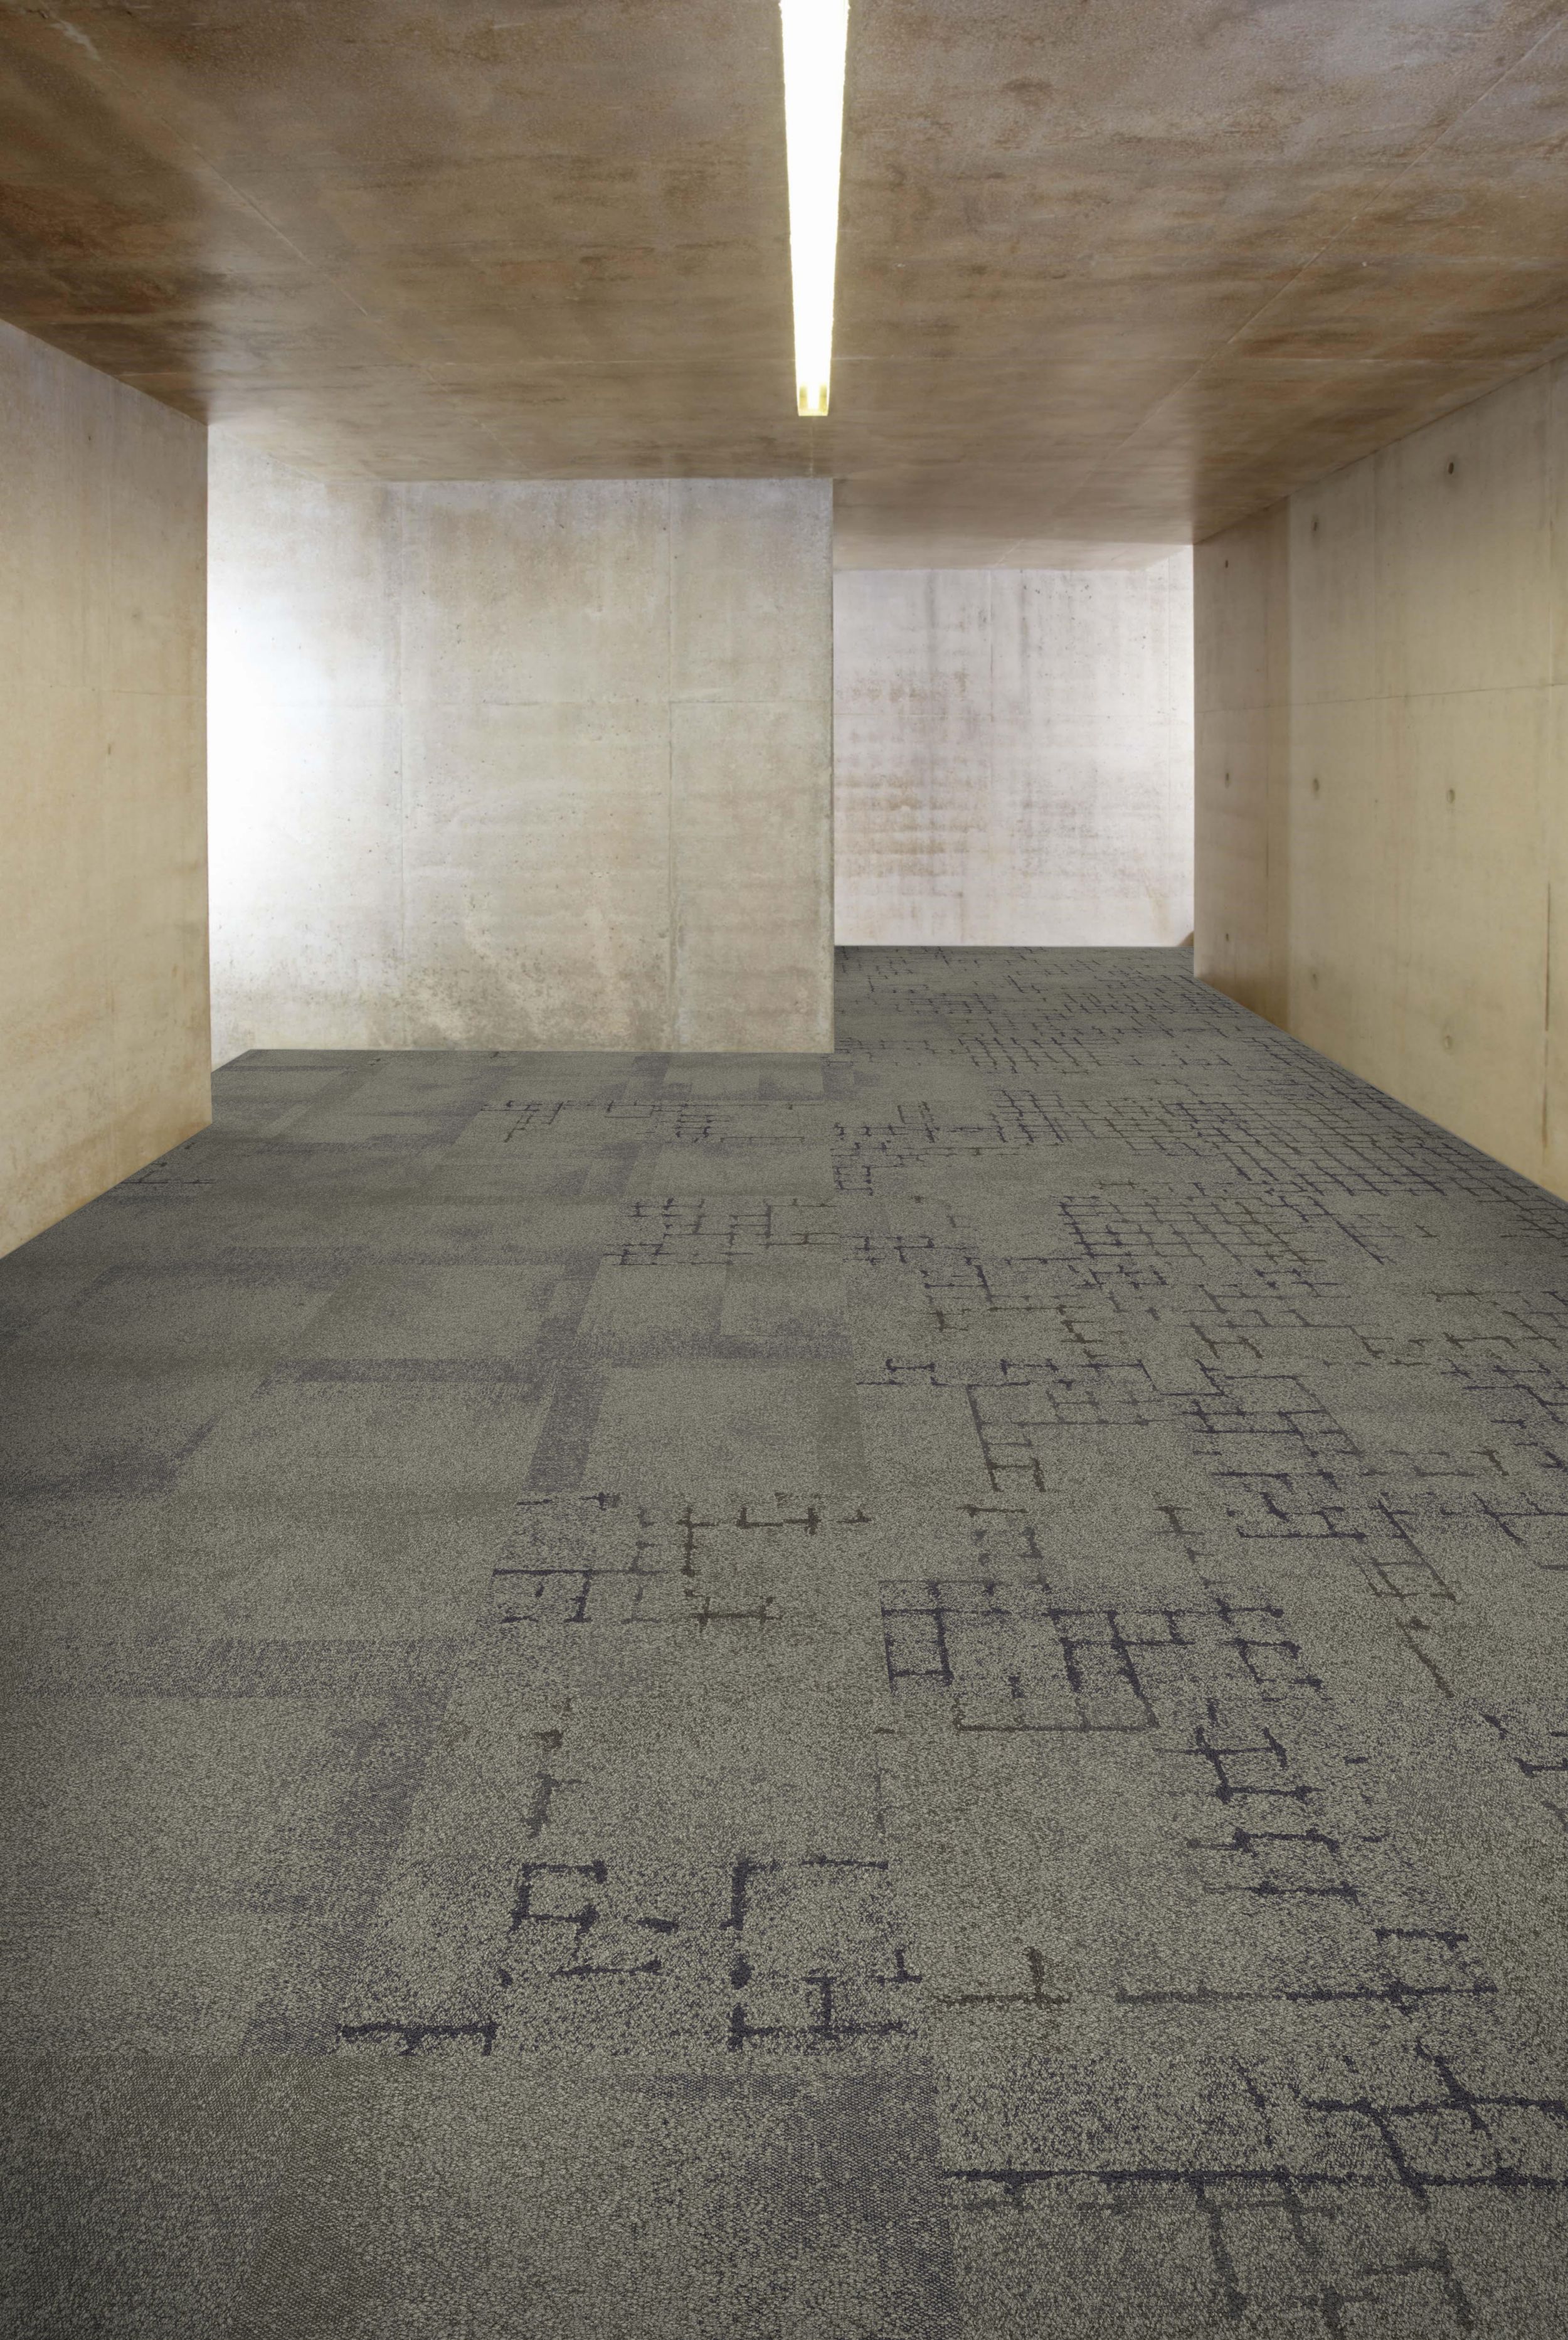 Interface Flagstone, Kerbstone and Sett in Stone carpet tile in corridor with concrete walls and ceiling imagen número 2